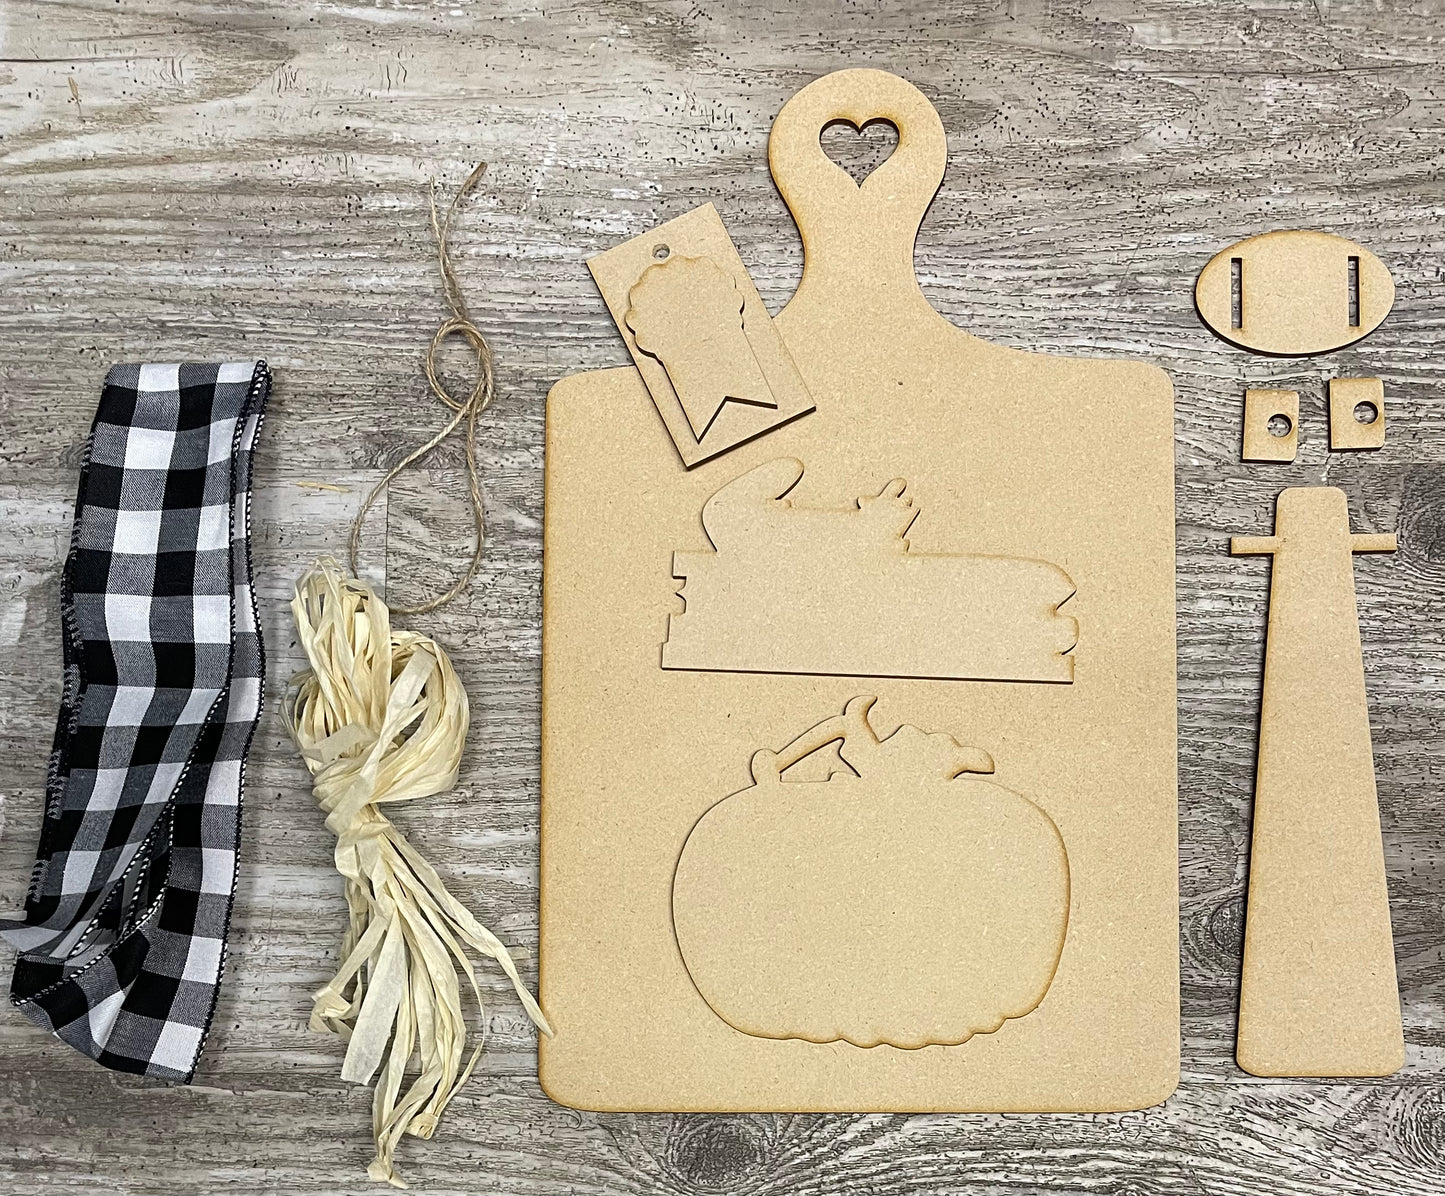 County Fair Cutting Board and cutouts - unpainted wooden cutouts, ready for you to paint